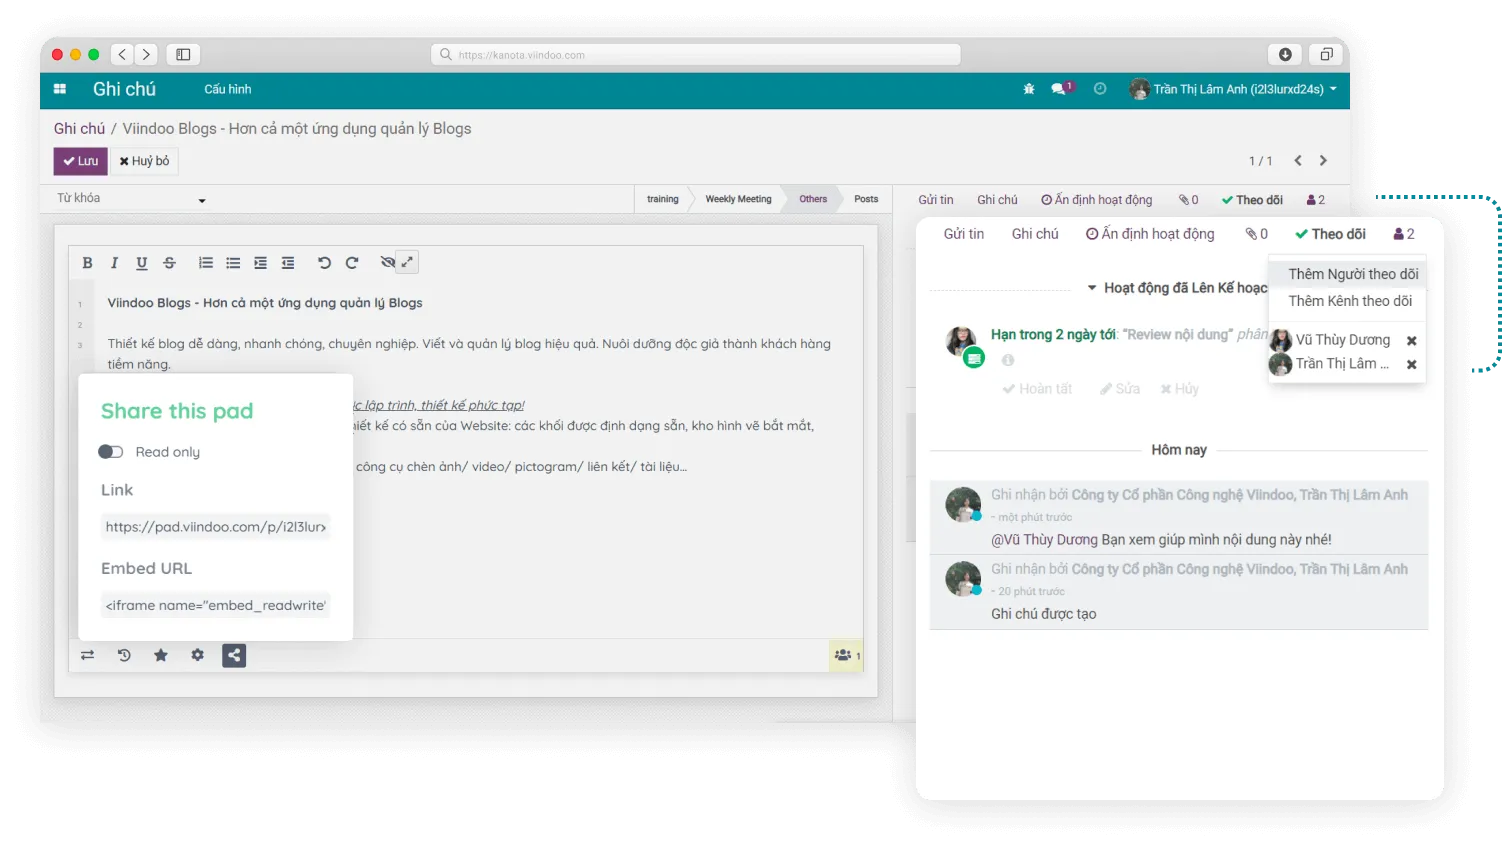 Collaborate on Viindoo Notes's chatter